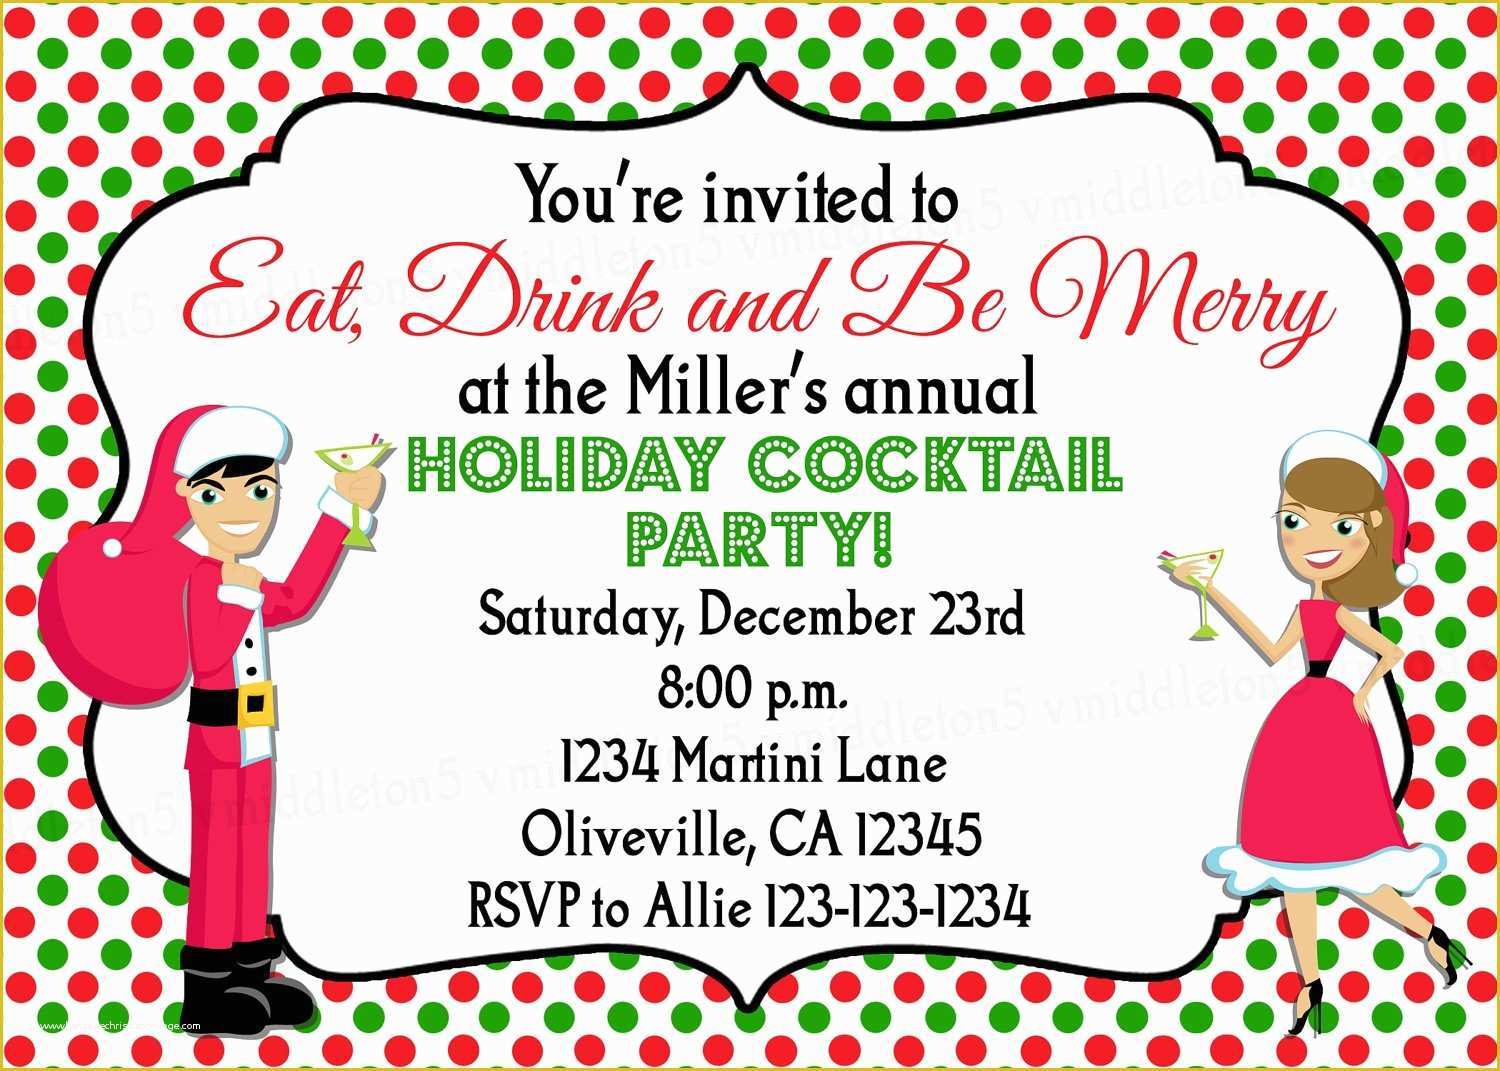 free-christmas-cocktail-party-invitation-templates-of-1000-images-about